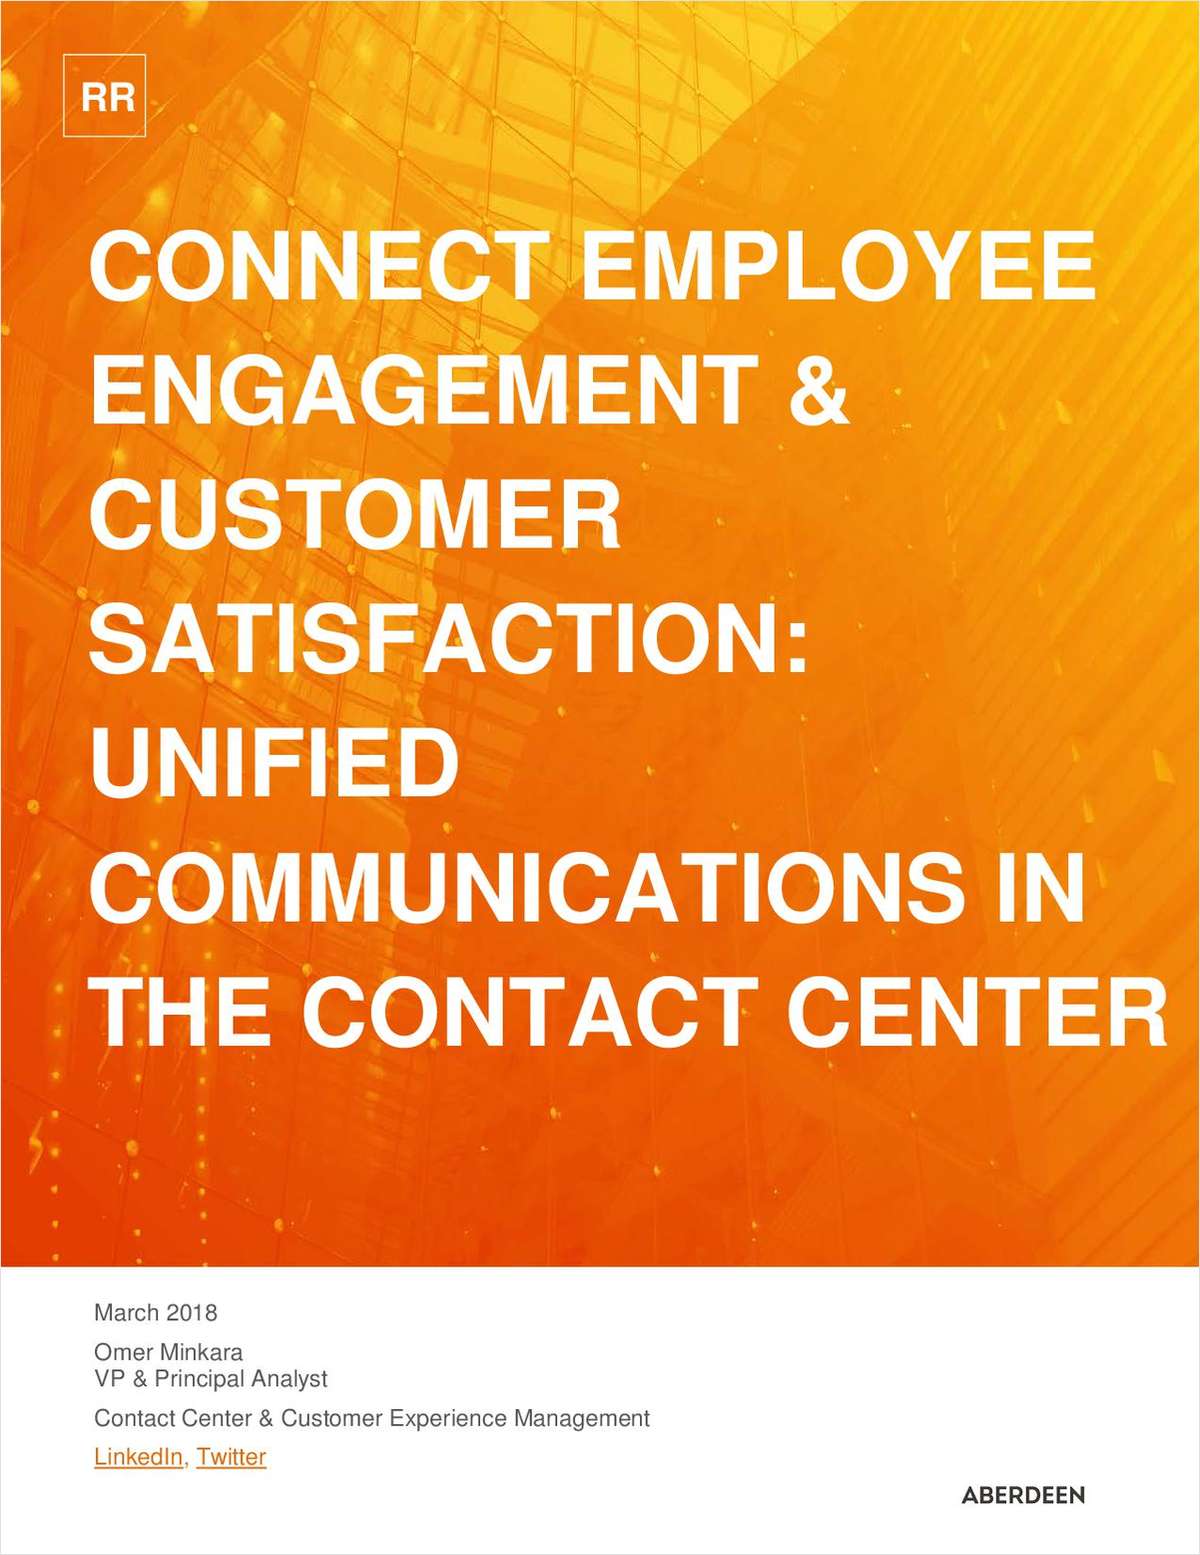 Maximize Contact Center Performance With Unified Communications